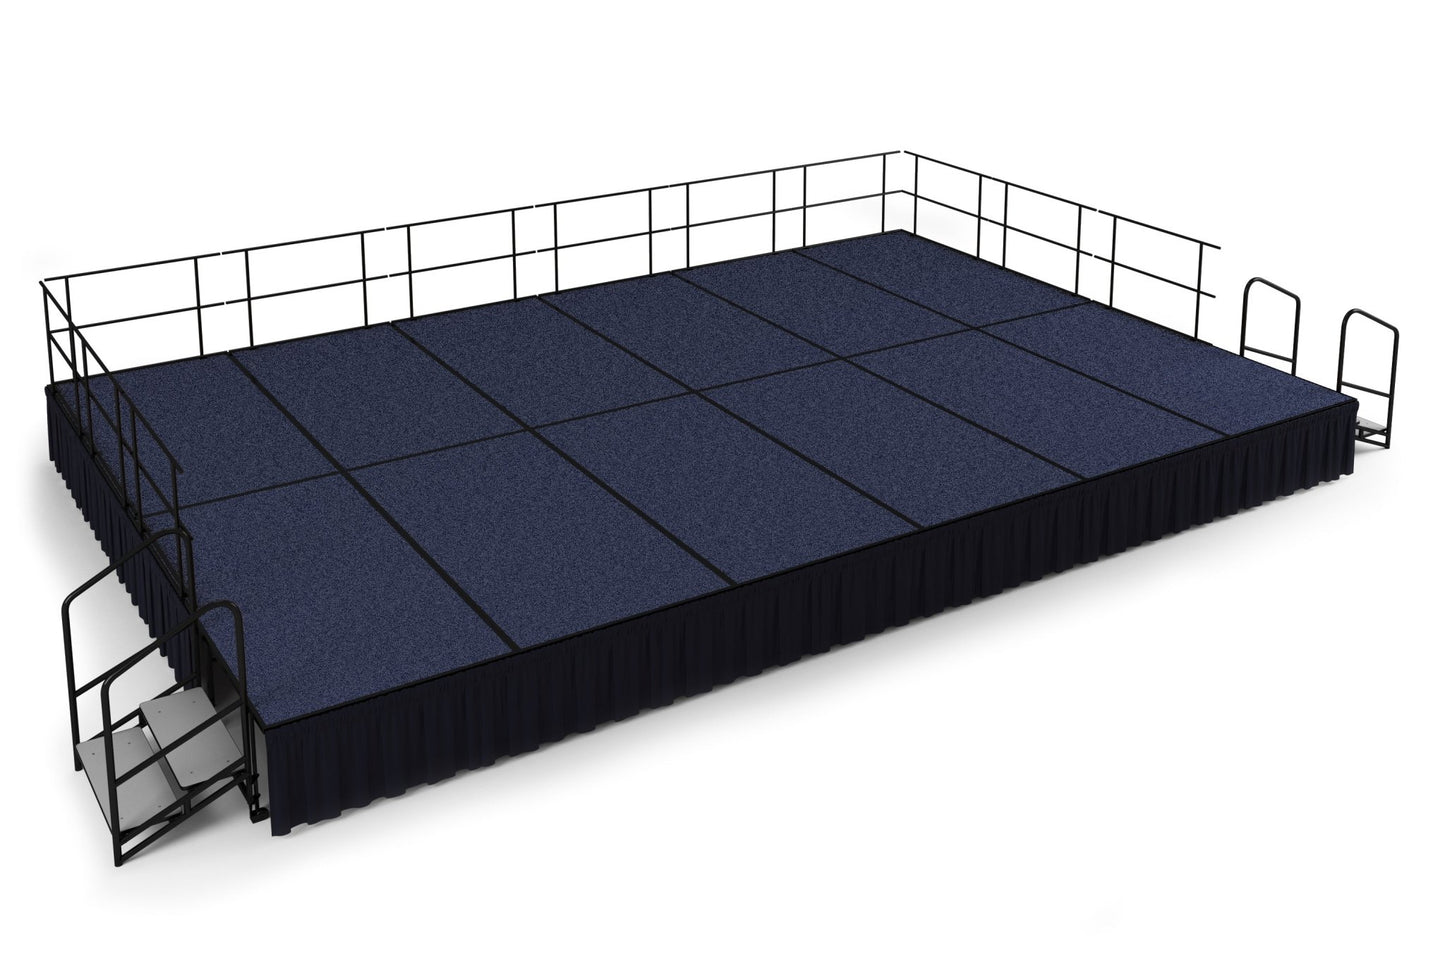 NPS Portable Stage Package w/ Carpeted or Hardboard Surface, 48"W x 24"H x 96"L, Boxed or Shirred Pleat Black Skirting - SchoolOutlet